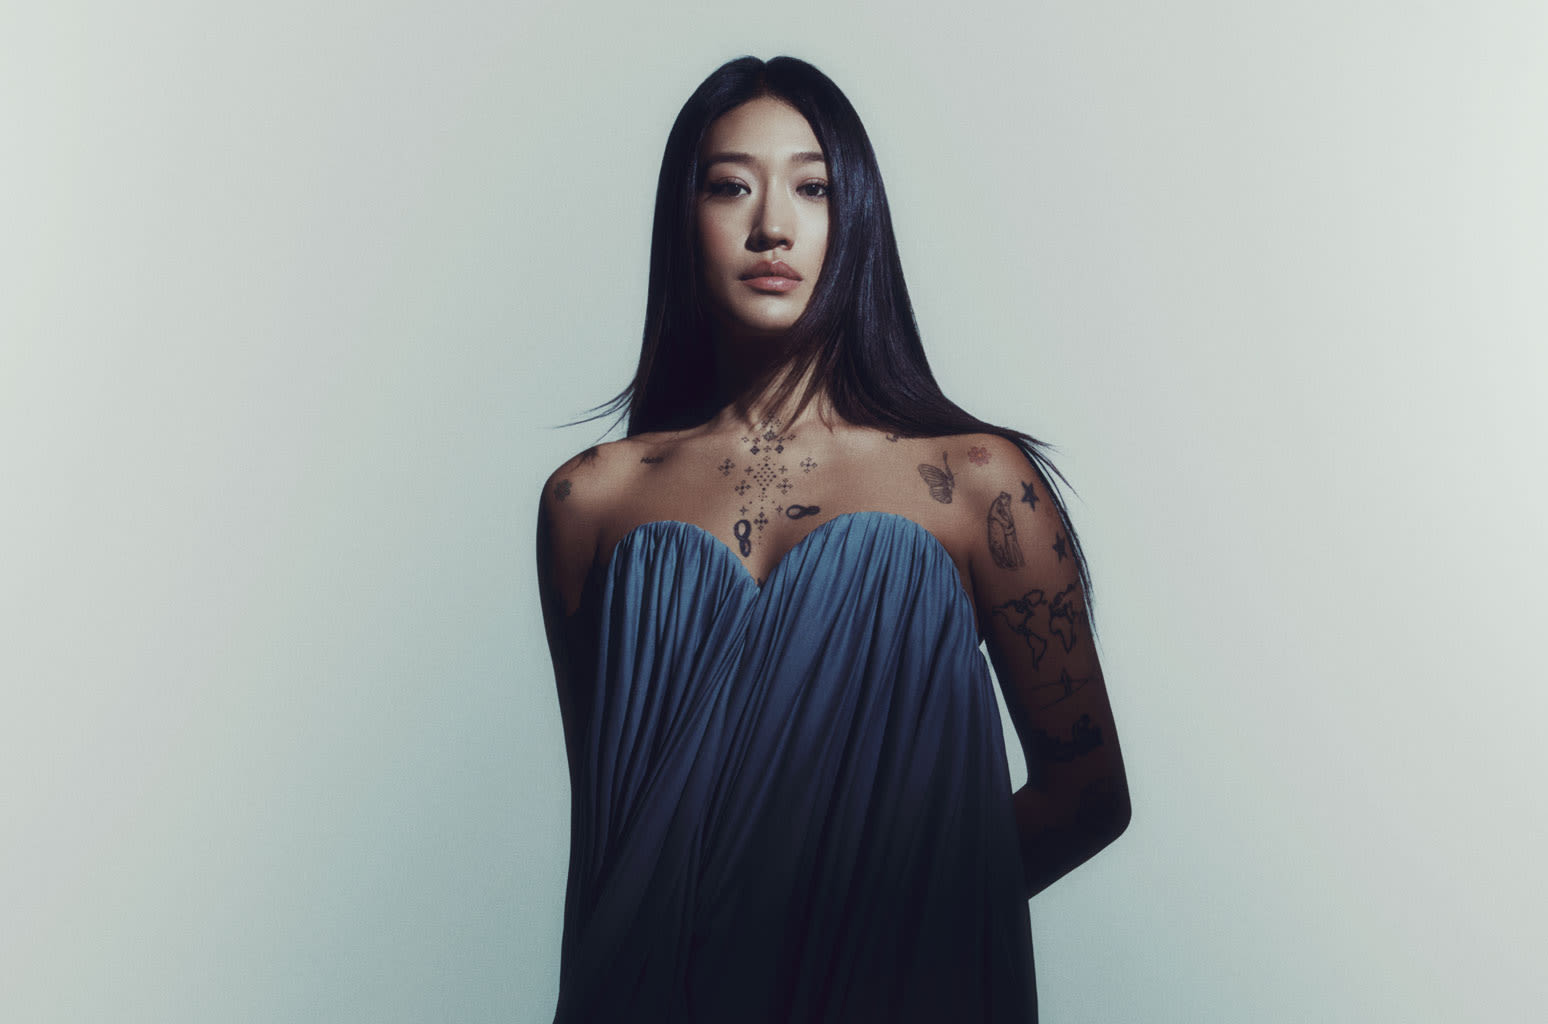 Friday Dance Music Guide: The Week’s Best New Tracks From Peggy Gou, Bebe Rexha, John Summit & More